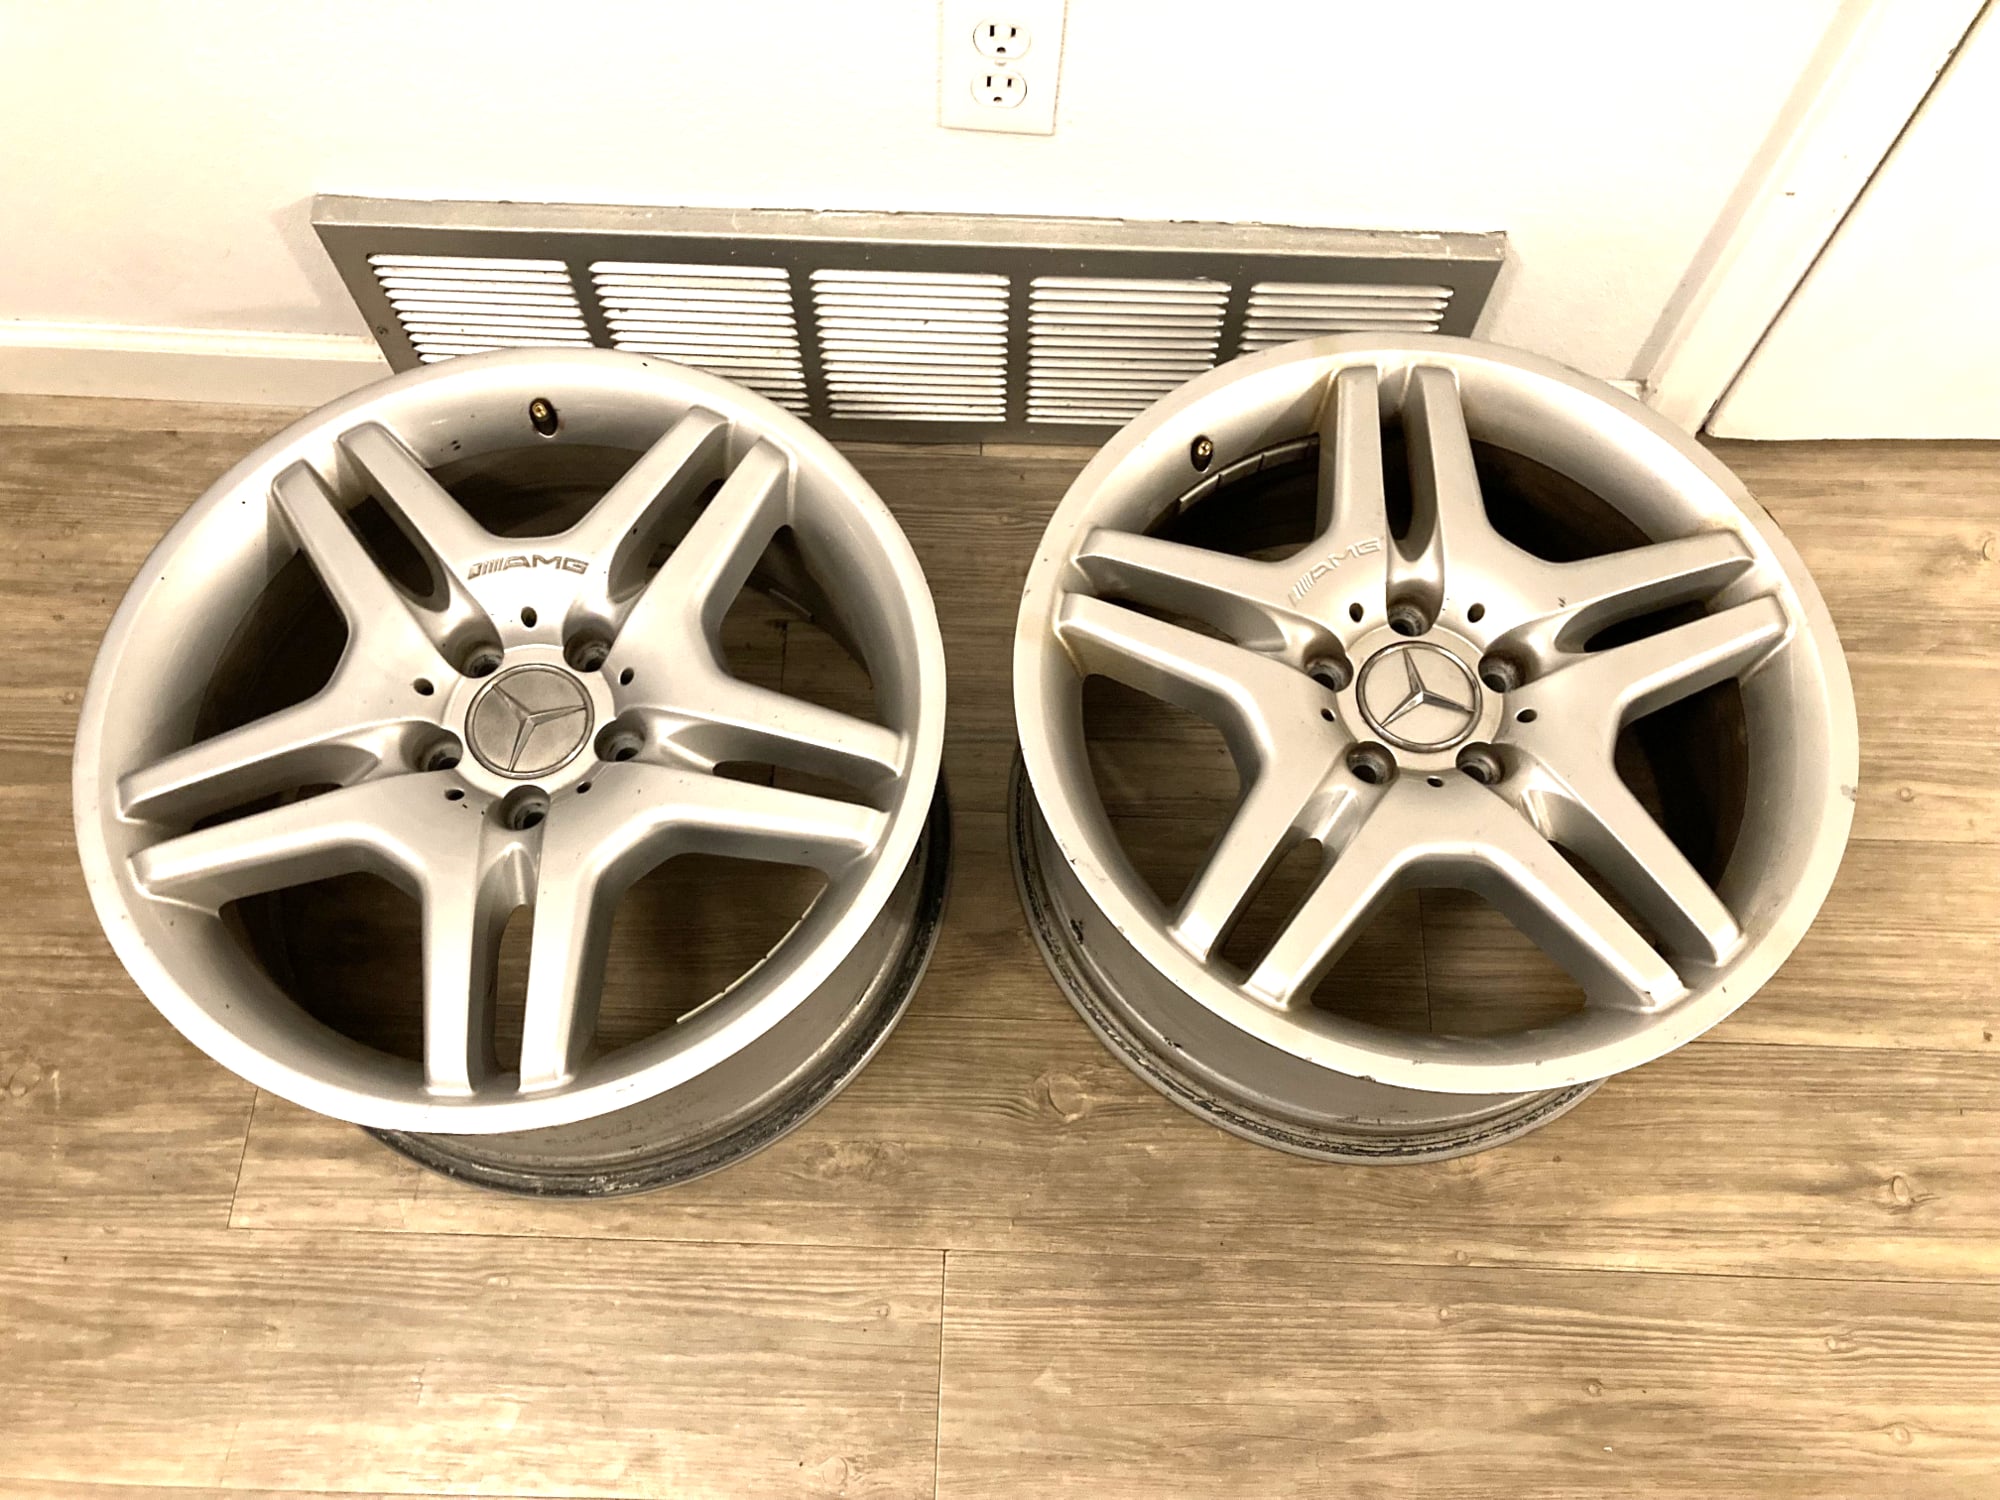 Wheels and Tires/Axles - 2003 S55 AMG wheels & Hamann 19" wheels / tires -  NO SHIPPING - Used - 0  All Models - Colorado Springs, CO 80920, United States